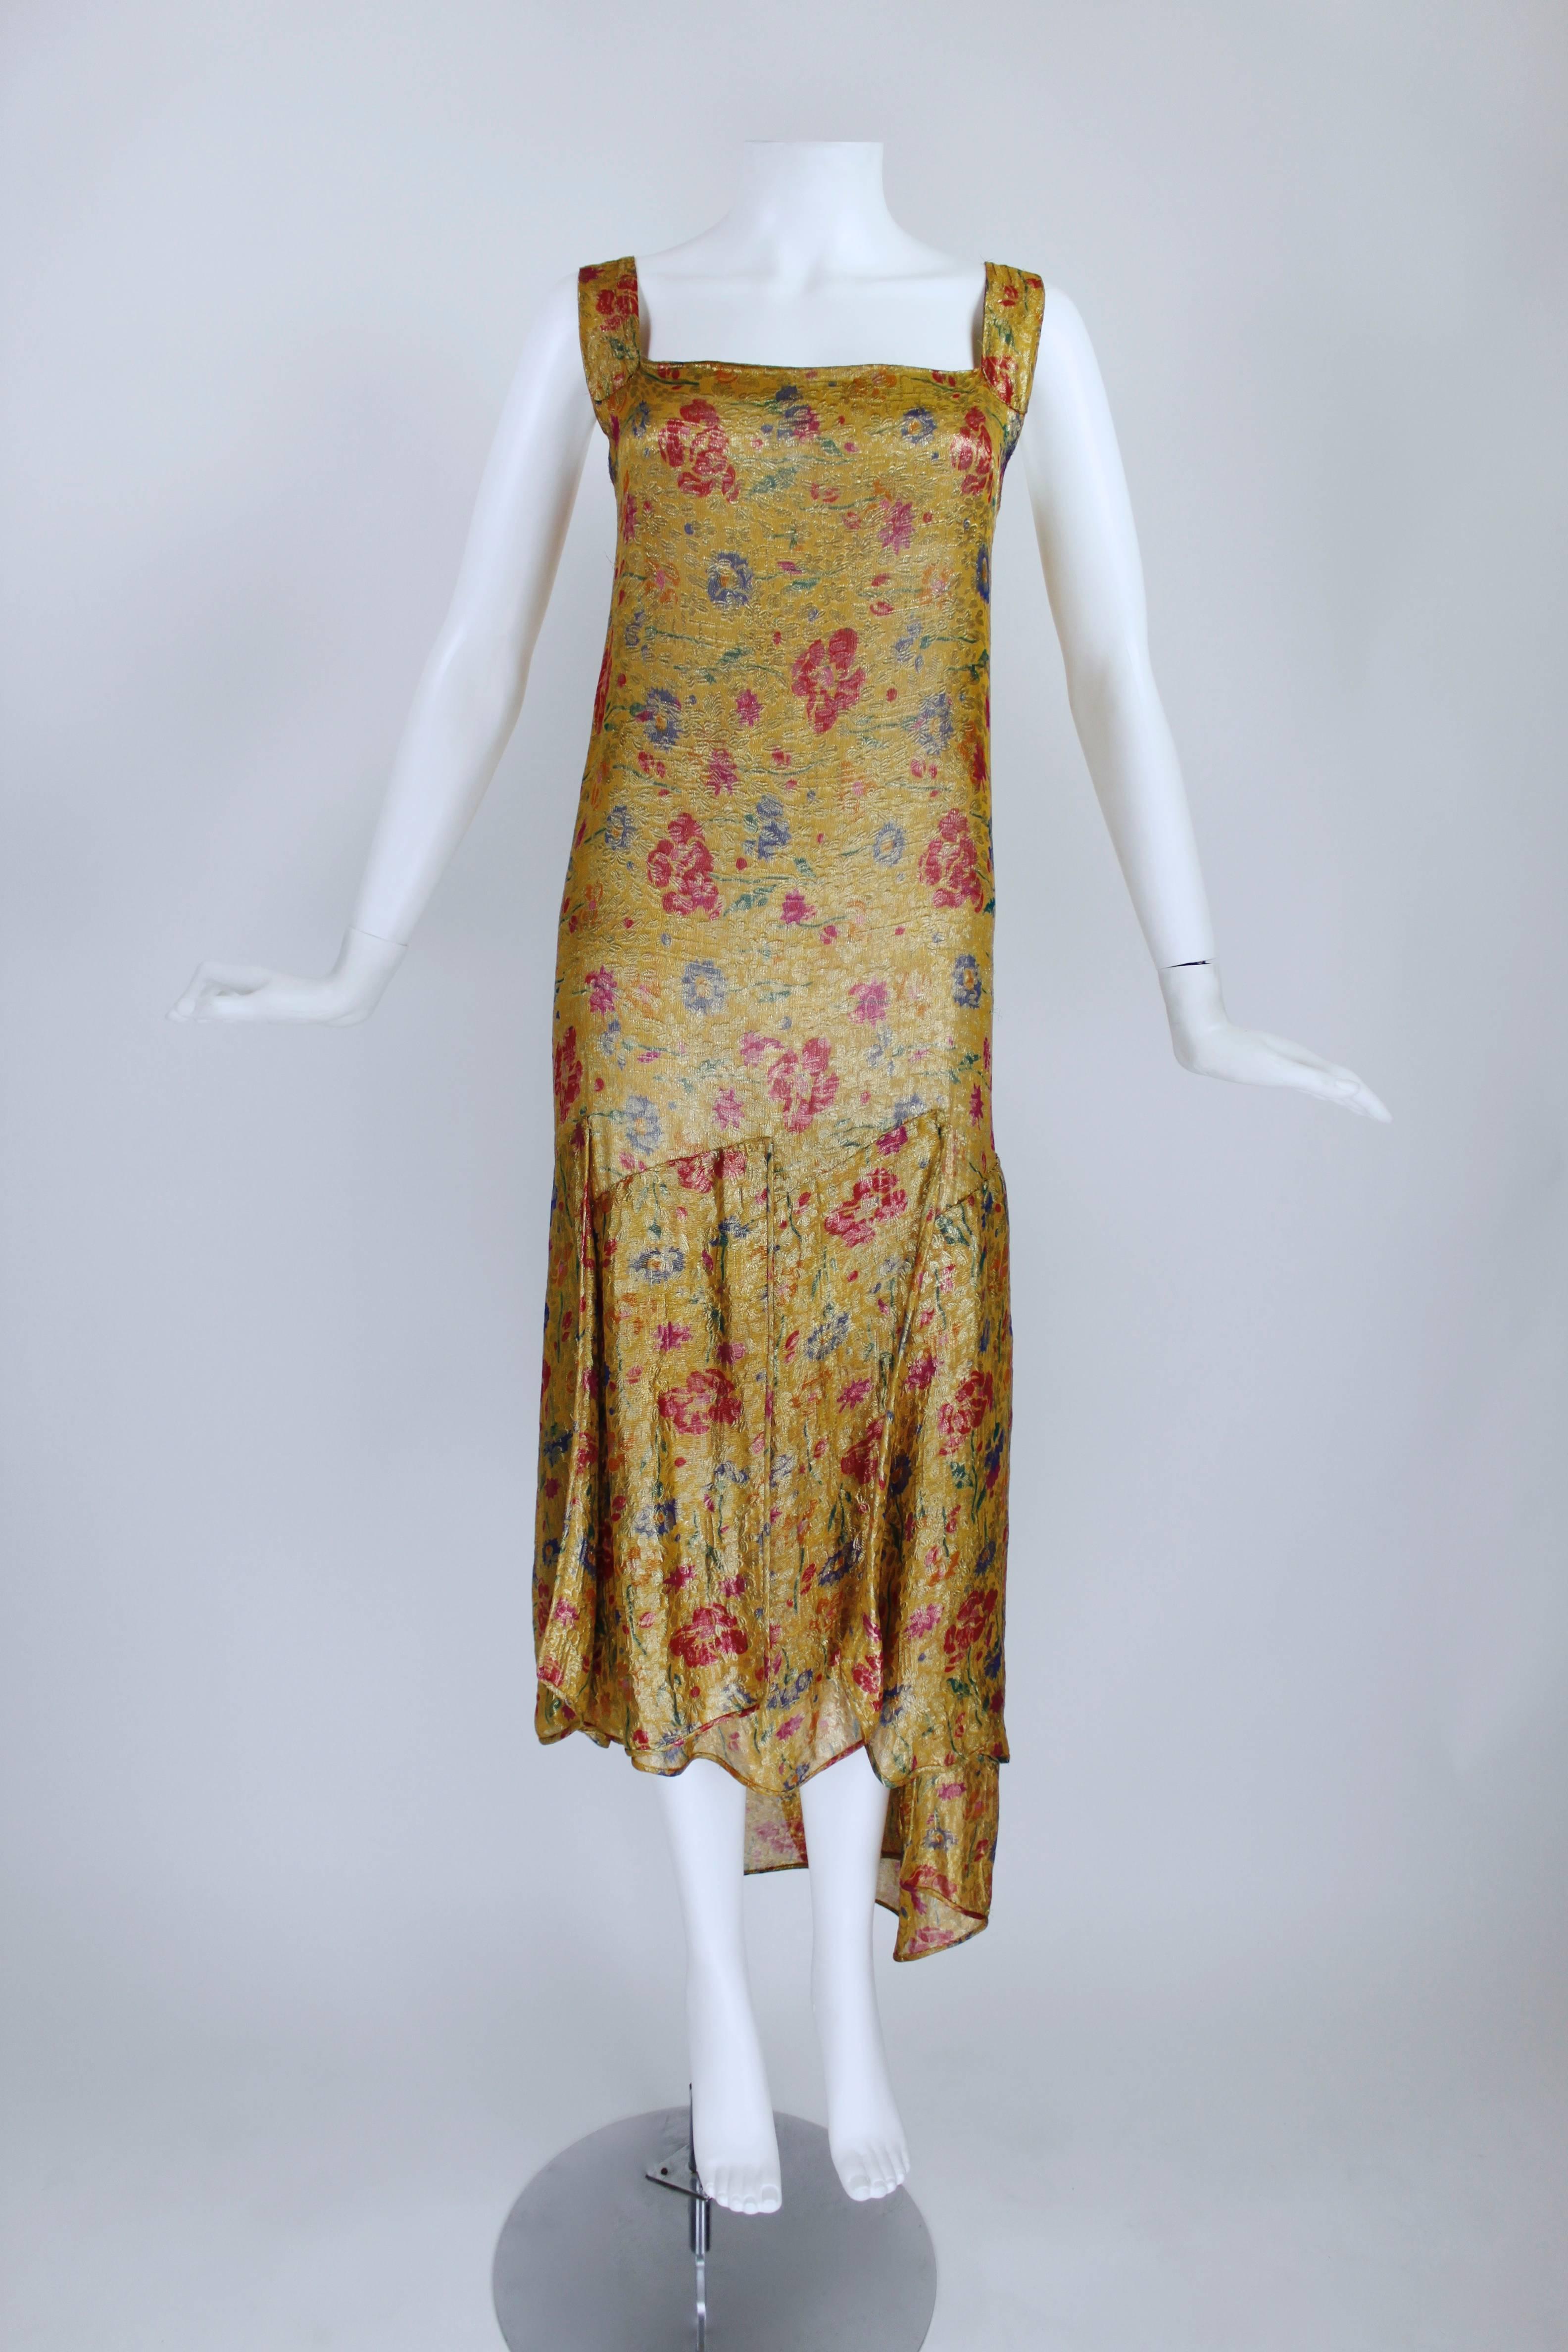 A gorgeous 1920s French lamé cocktail dress, featuring a romantic, vibrant floral pattern laced with metallic gold thread throughout. The silhouette has an iconic drop-waist hem and tiered, asymmetrical panels hanging down--perfect for